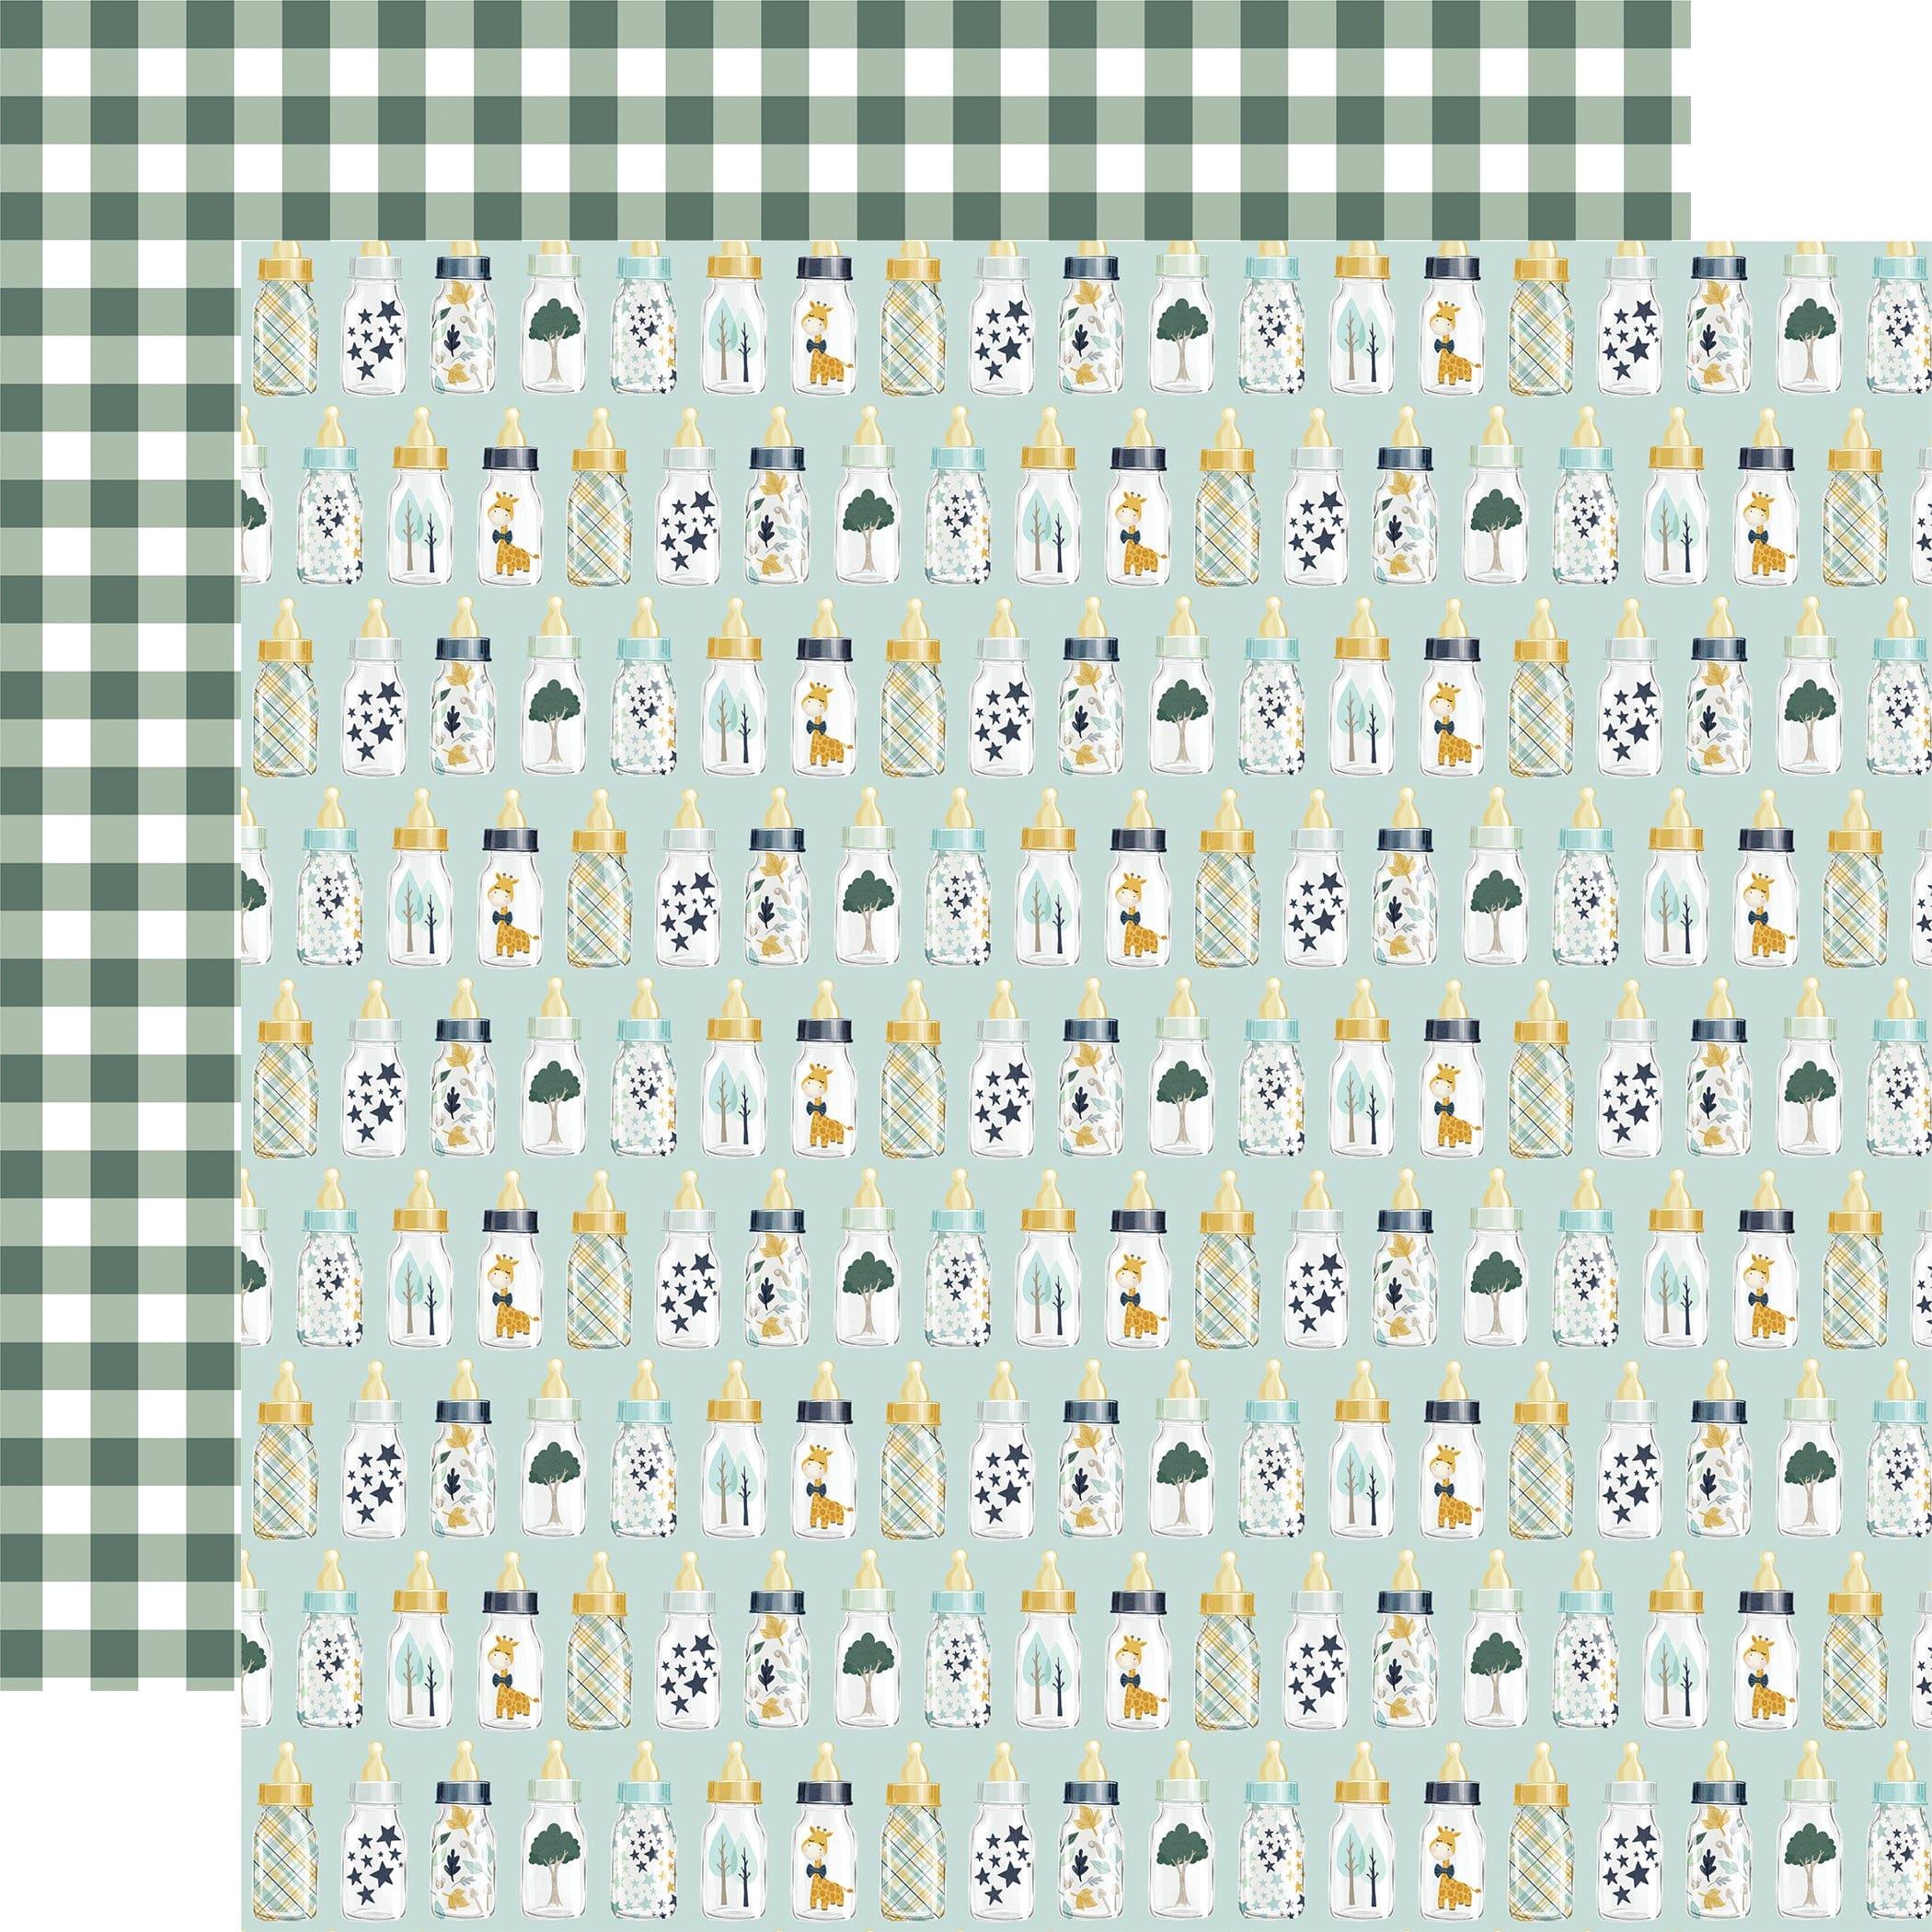 It's A Boy Collection Boy Baby Bottles 12 x 12 Double-Sided Scrapbook Paper by Echo Park Paper - Scrapbook Supply Companies